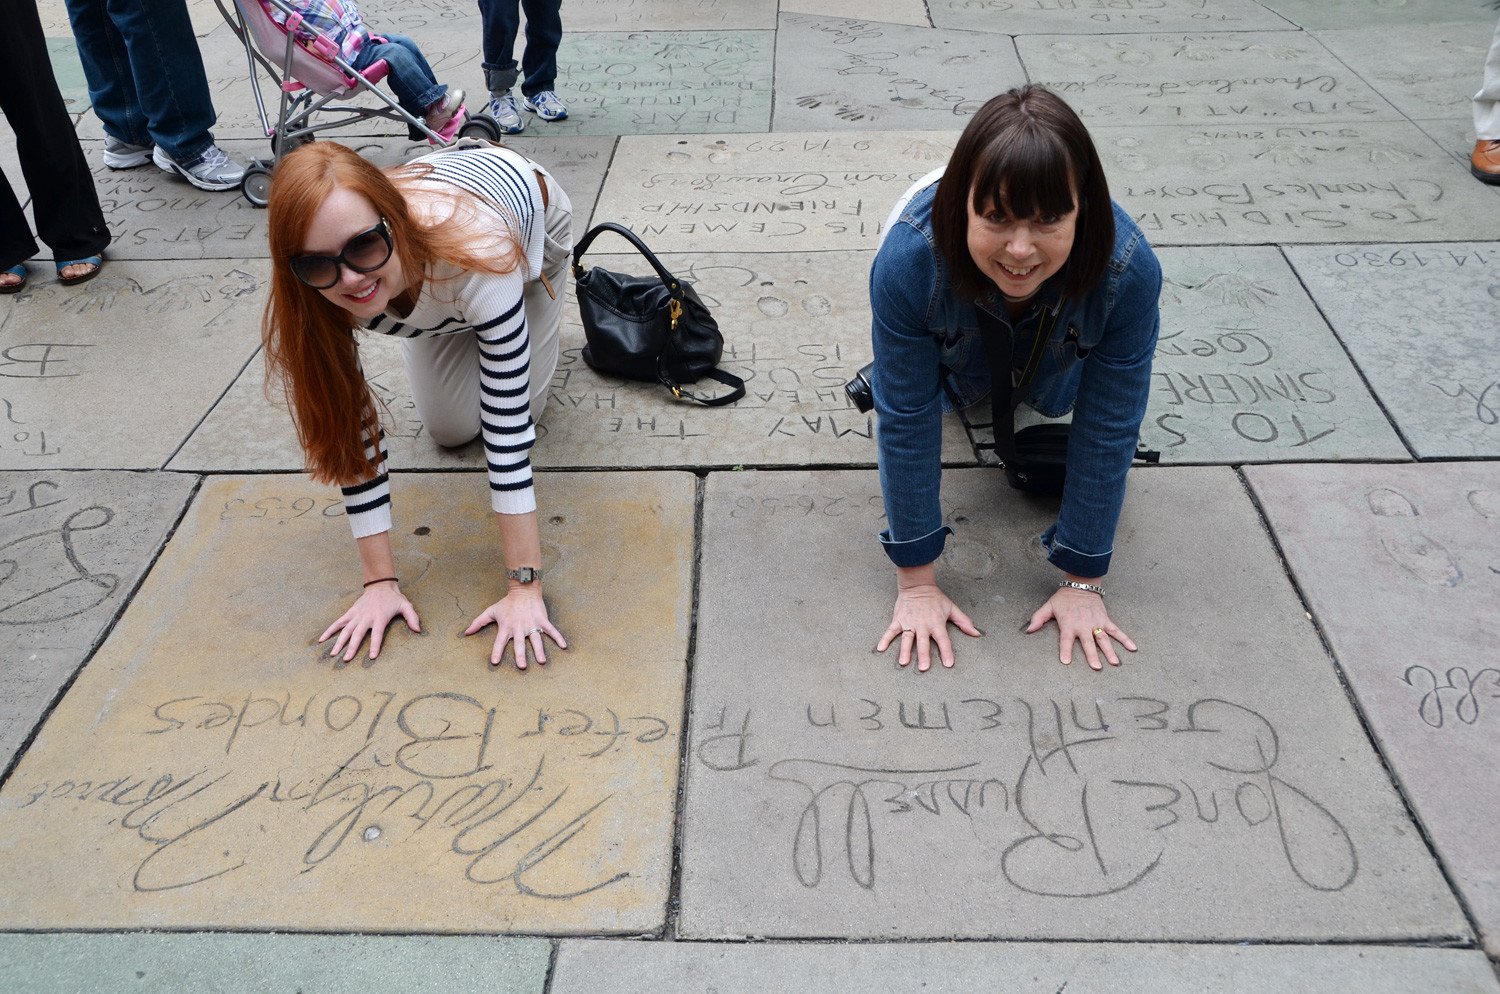 Marilyn Monroe and Jane Mansfield's handprints outside Mann's Chinese Theater on Hollywood Boulevard